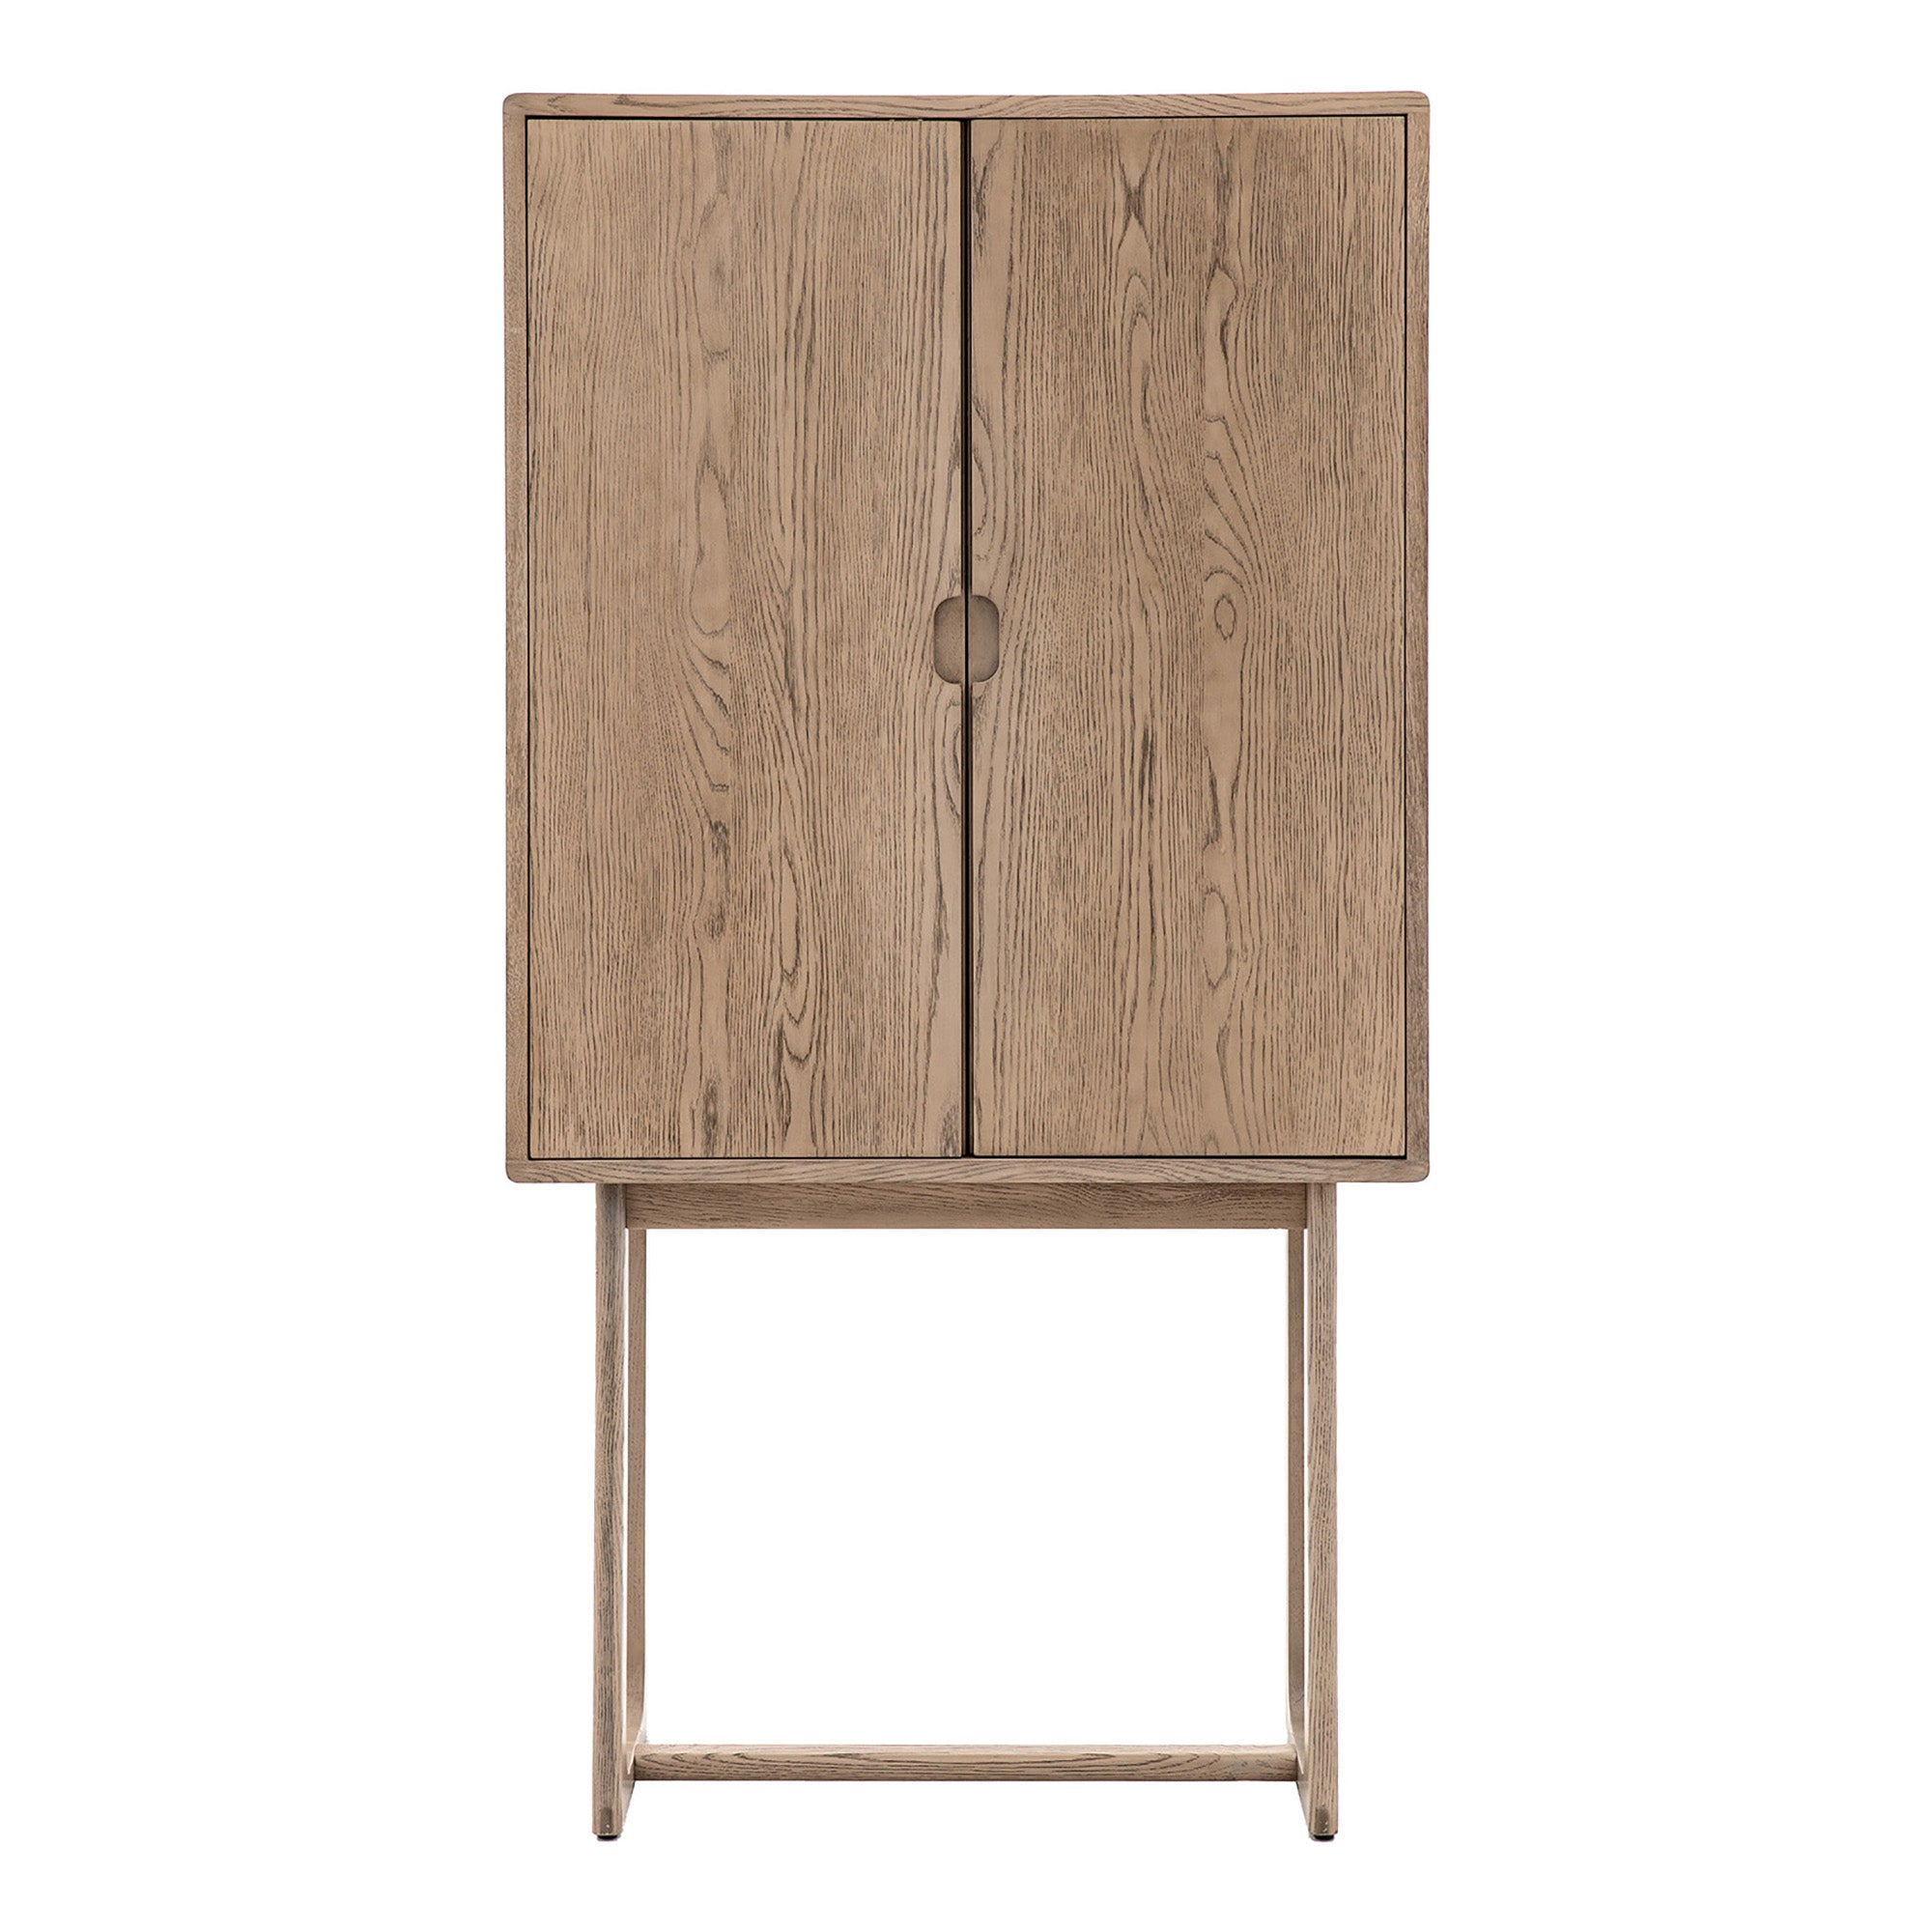 The Finest Wooden Cocktail Cabinet